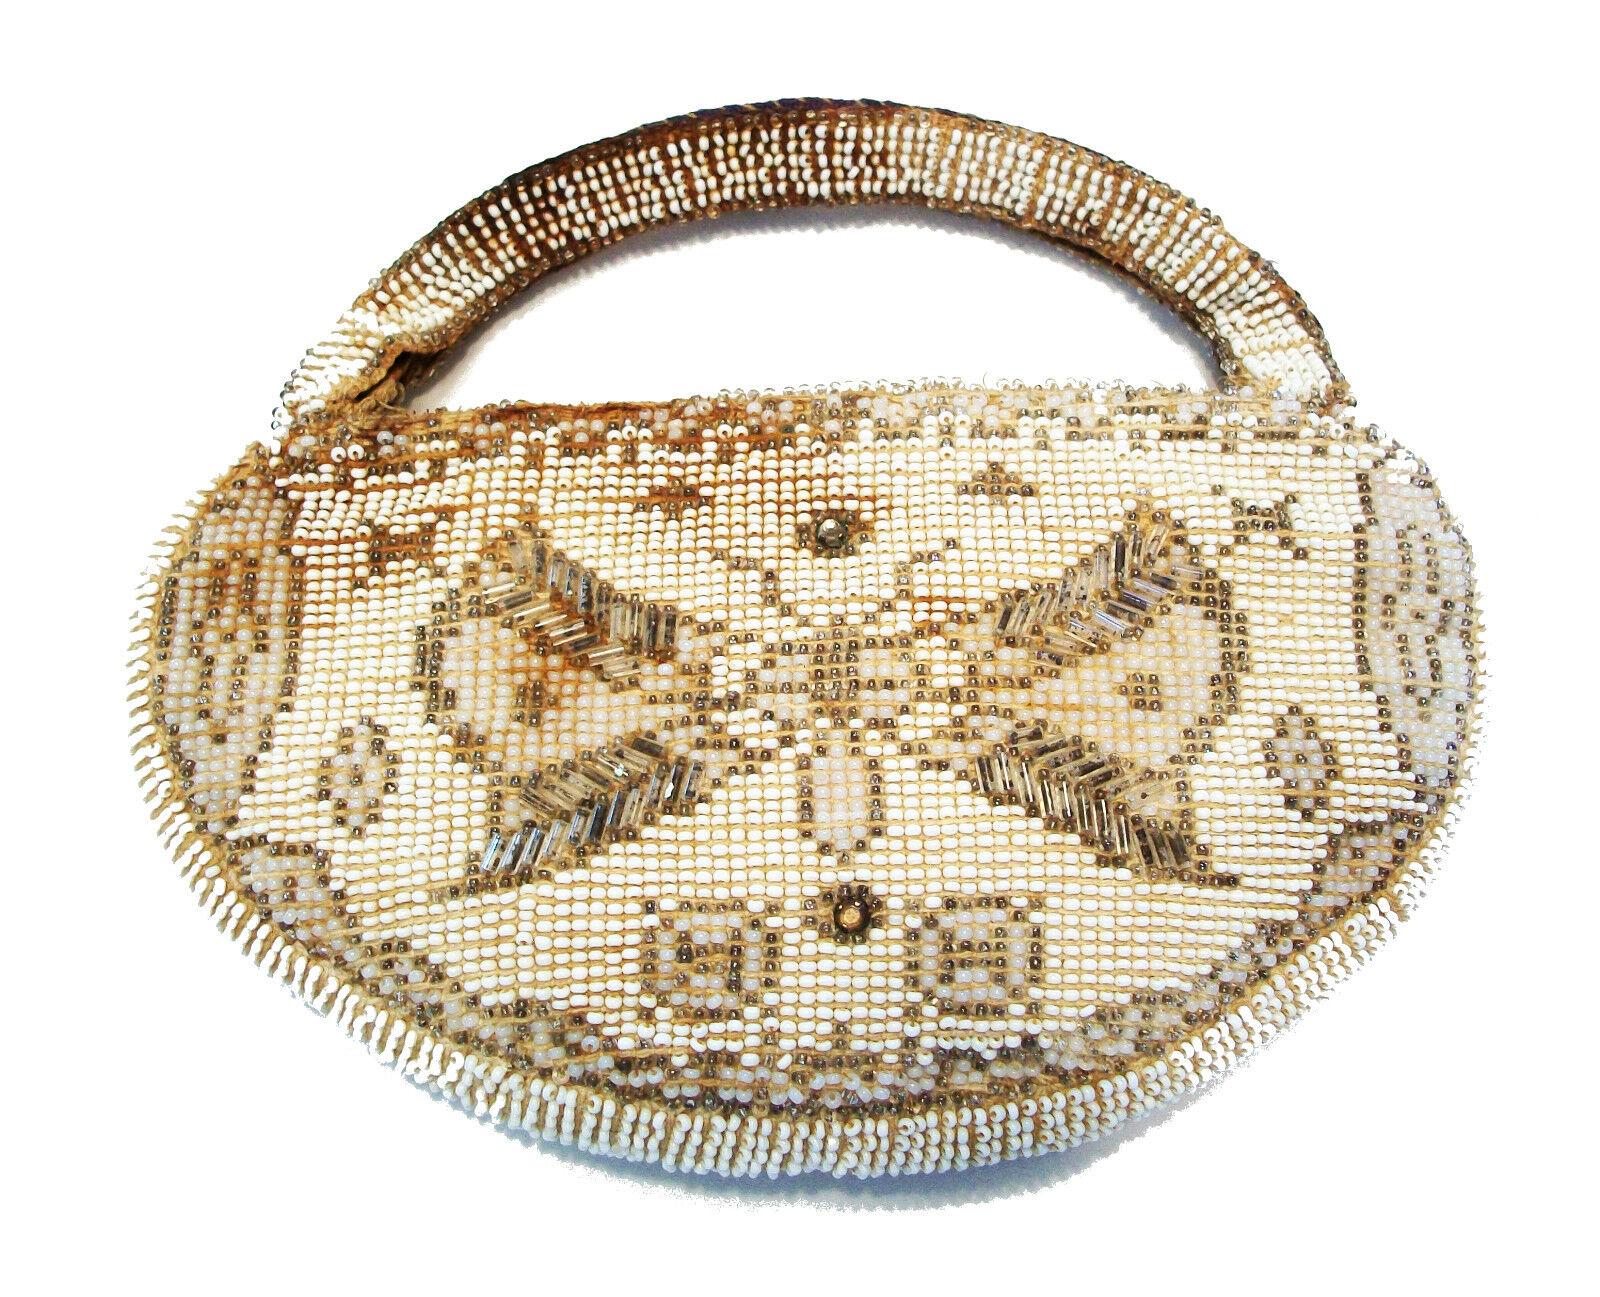 Art Deco beaded evening bag with butterflies - small size  - fine beading and detail hand-sewn with milk glass and opaque round and bugle beads - original zipper closure - fully beaded strap - original lining - original label showing country of